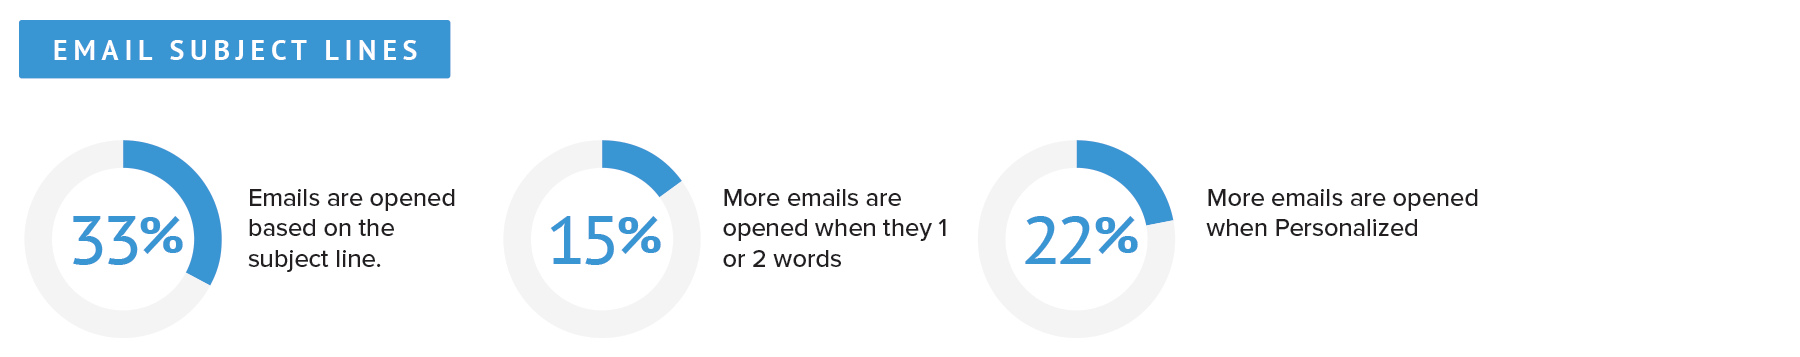 Email marketing subject line stats, 33% emails opened on subject lines, 15% emails opened when subject line is 1 or 2 words, 22% emails are opened when personalized